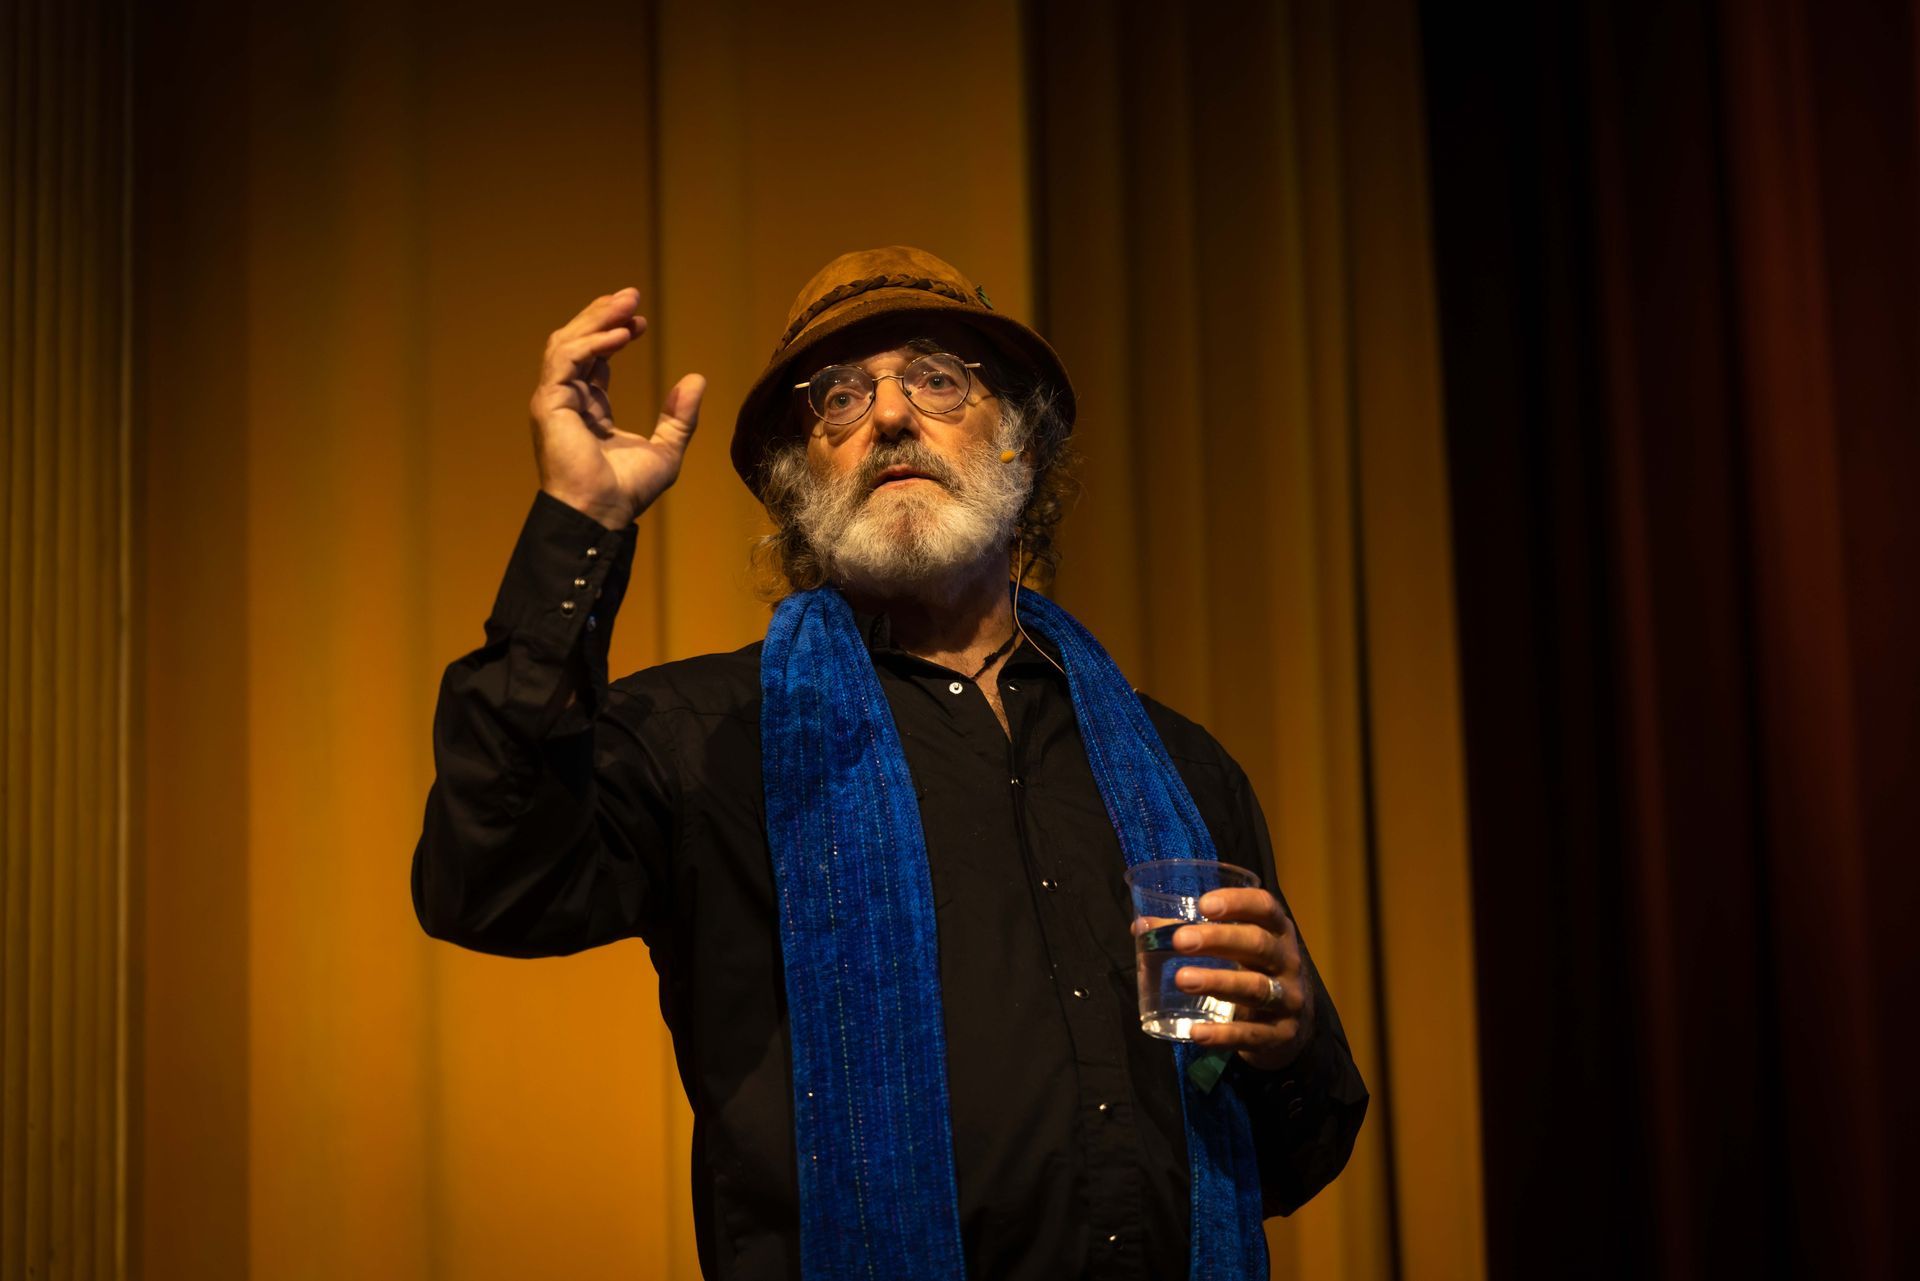 A man with a beard is holding a glass of water on a stage.